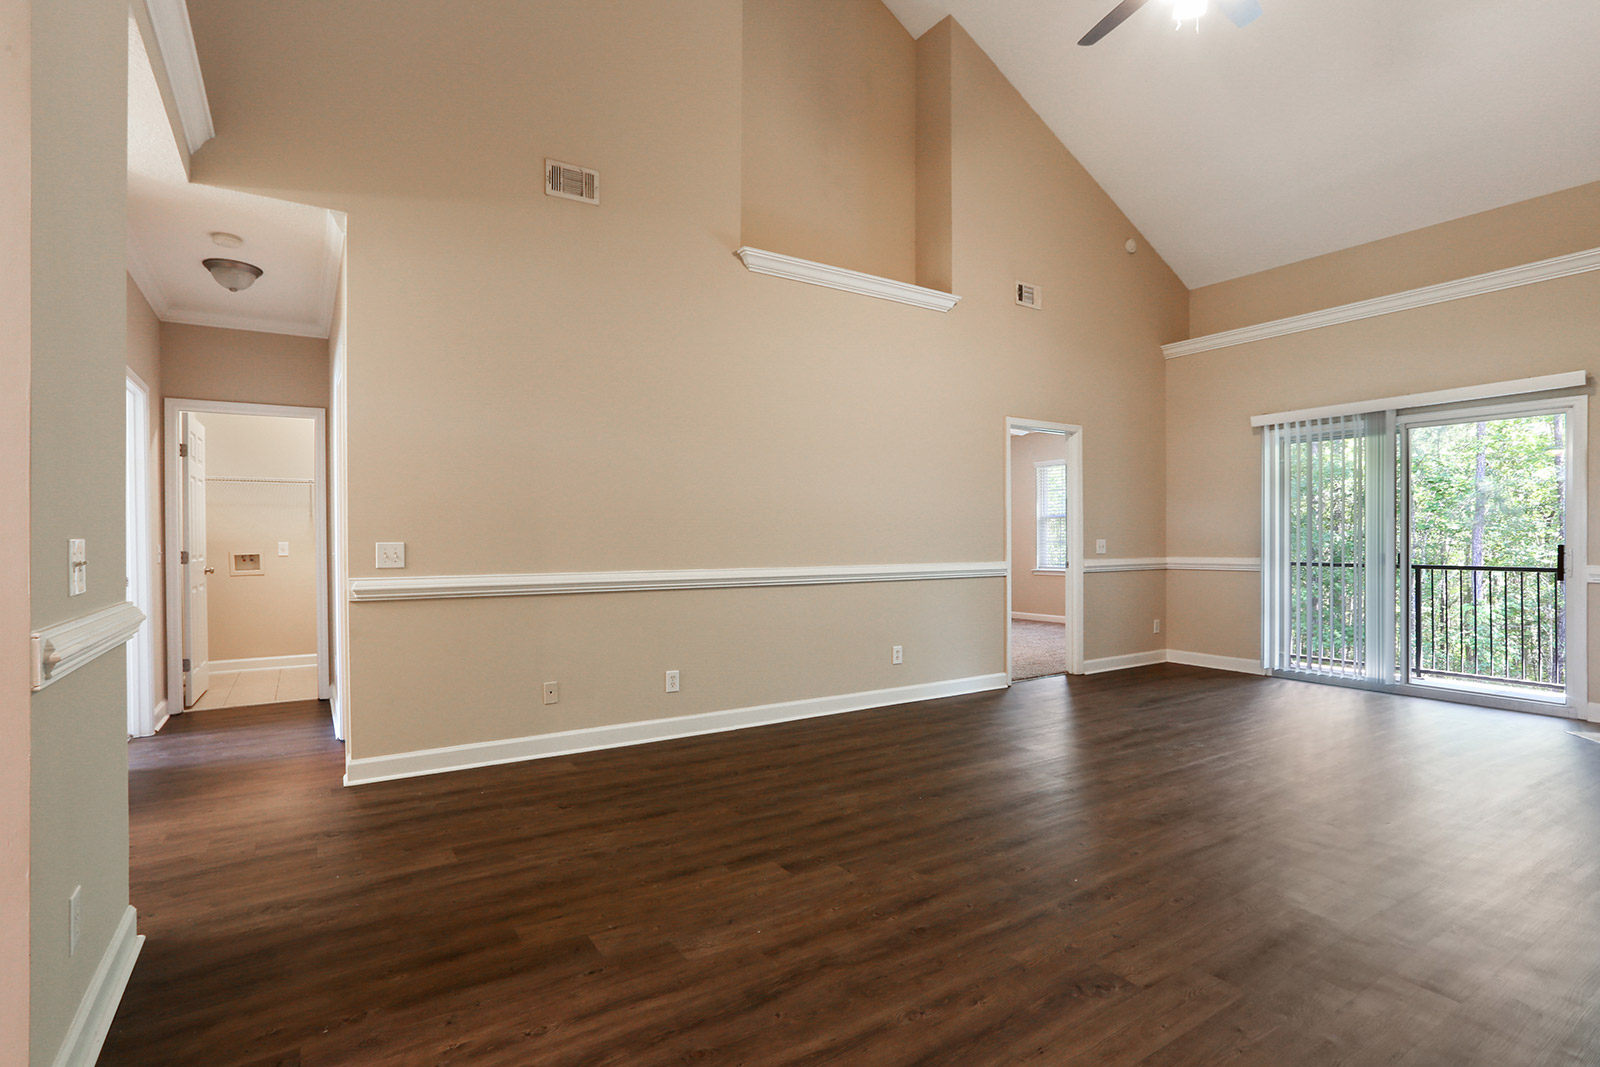 a large empty room with a wood floor